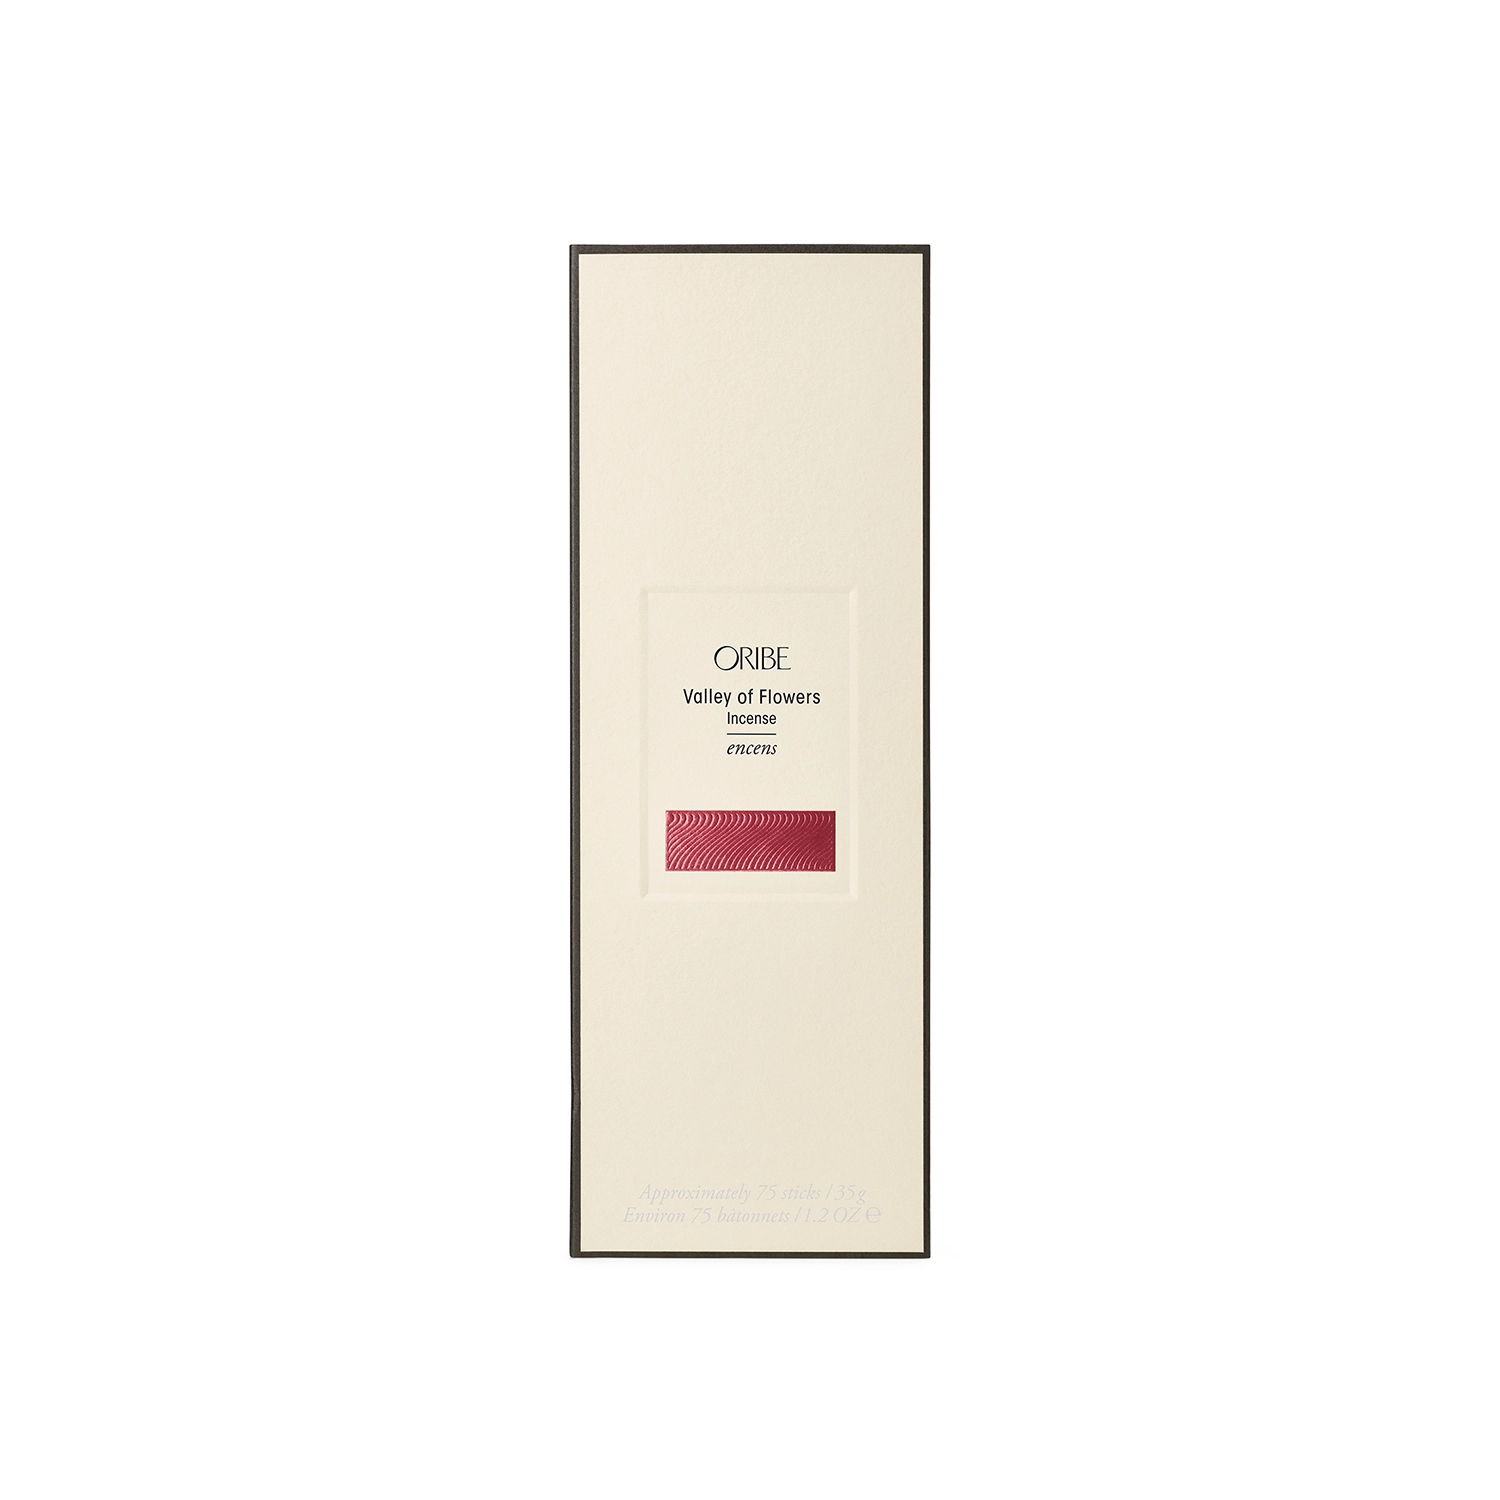 ORIBE - Valley of Flowers Incense